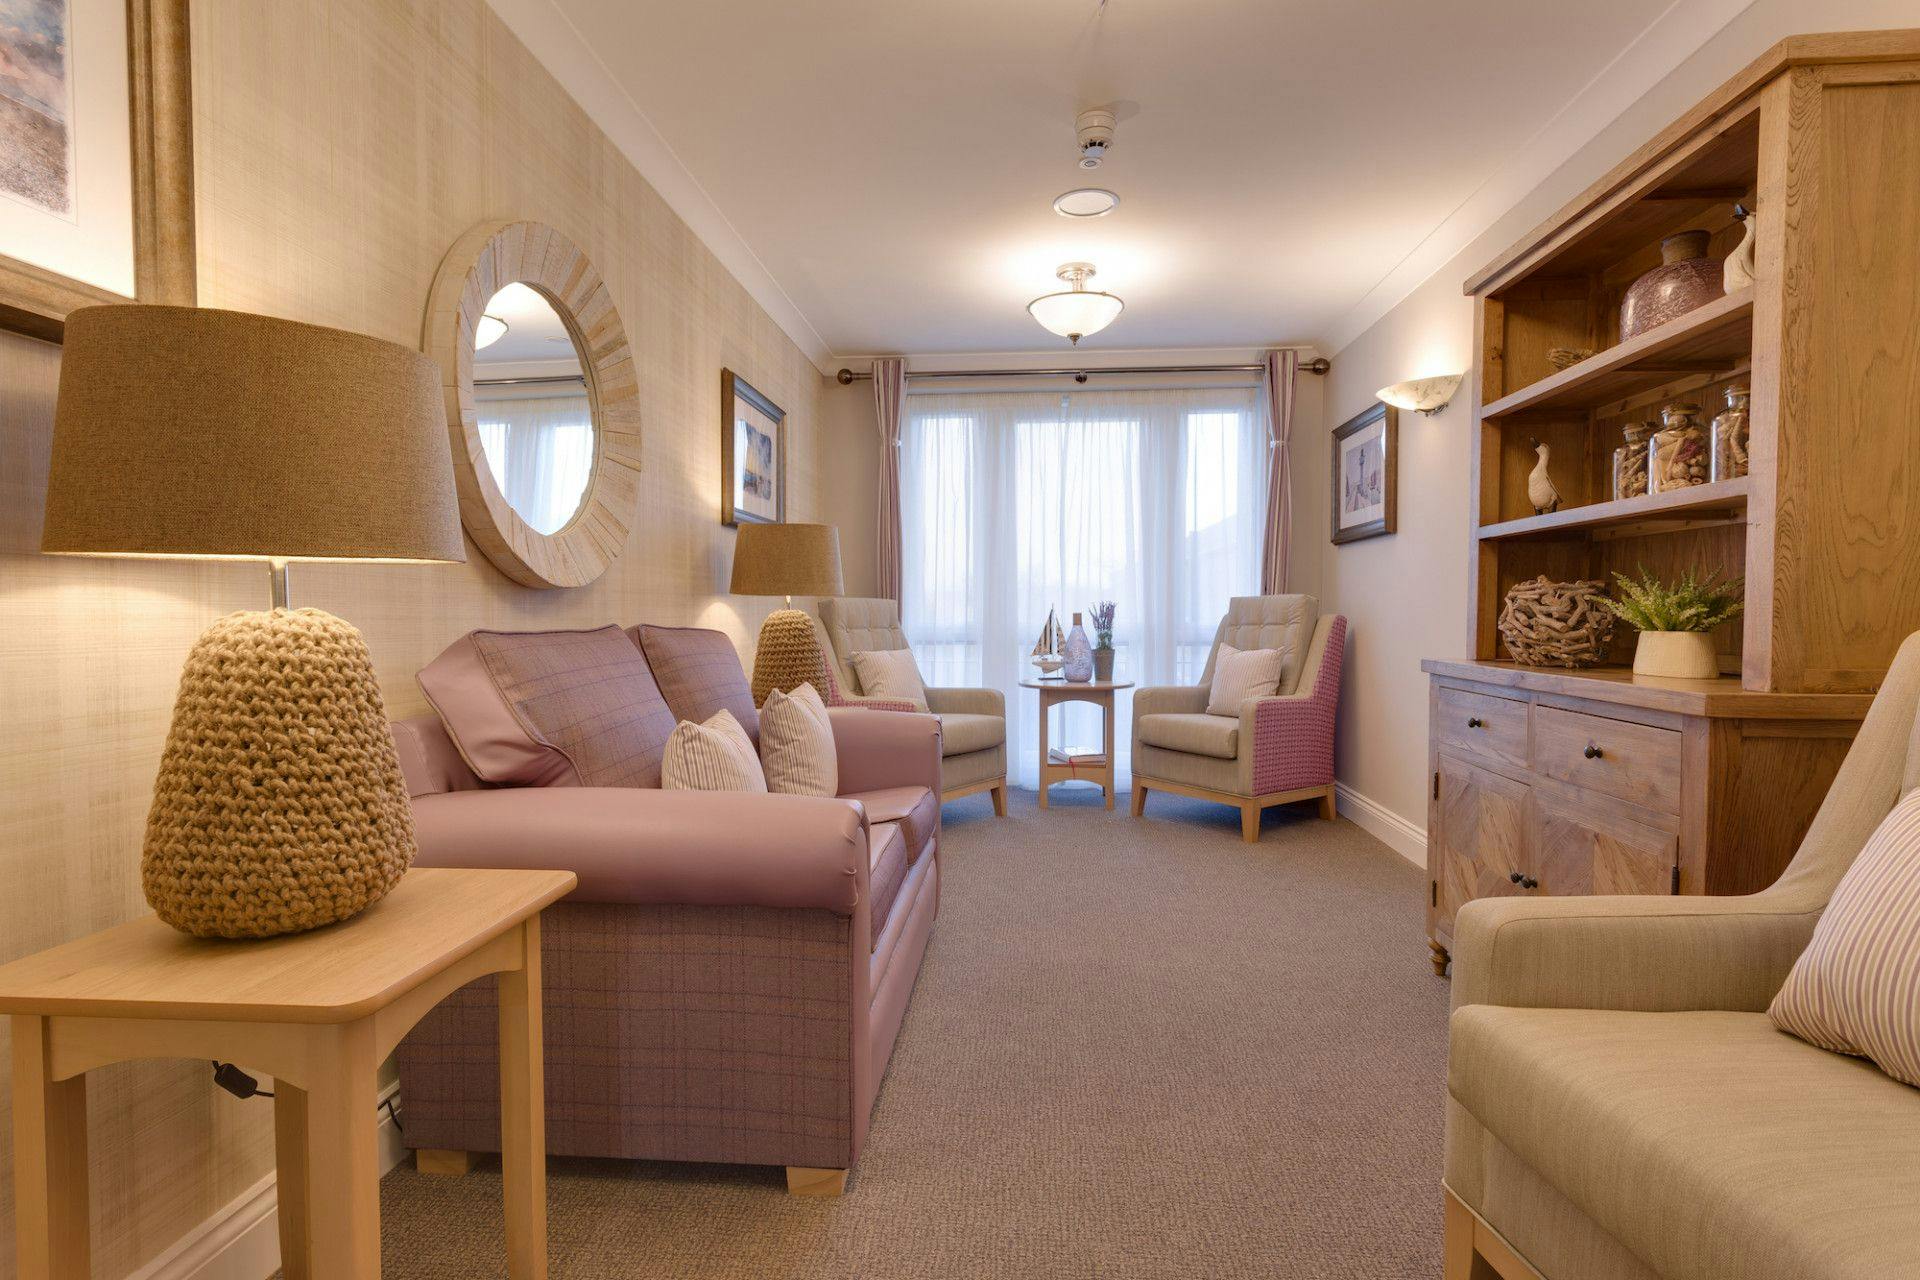 Harrier Lodge care home